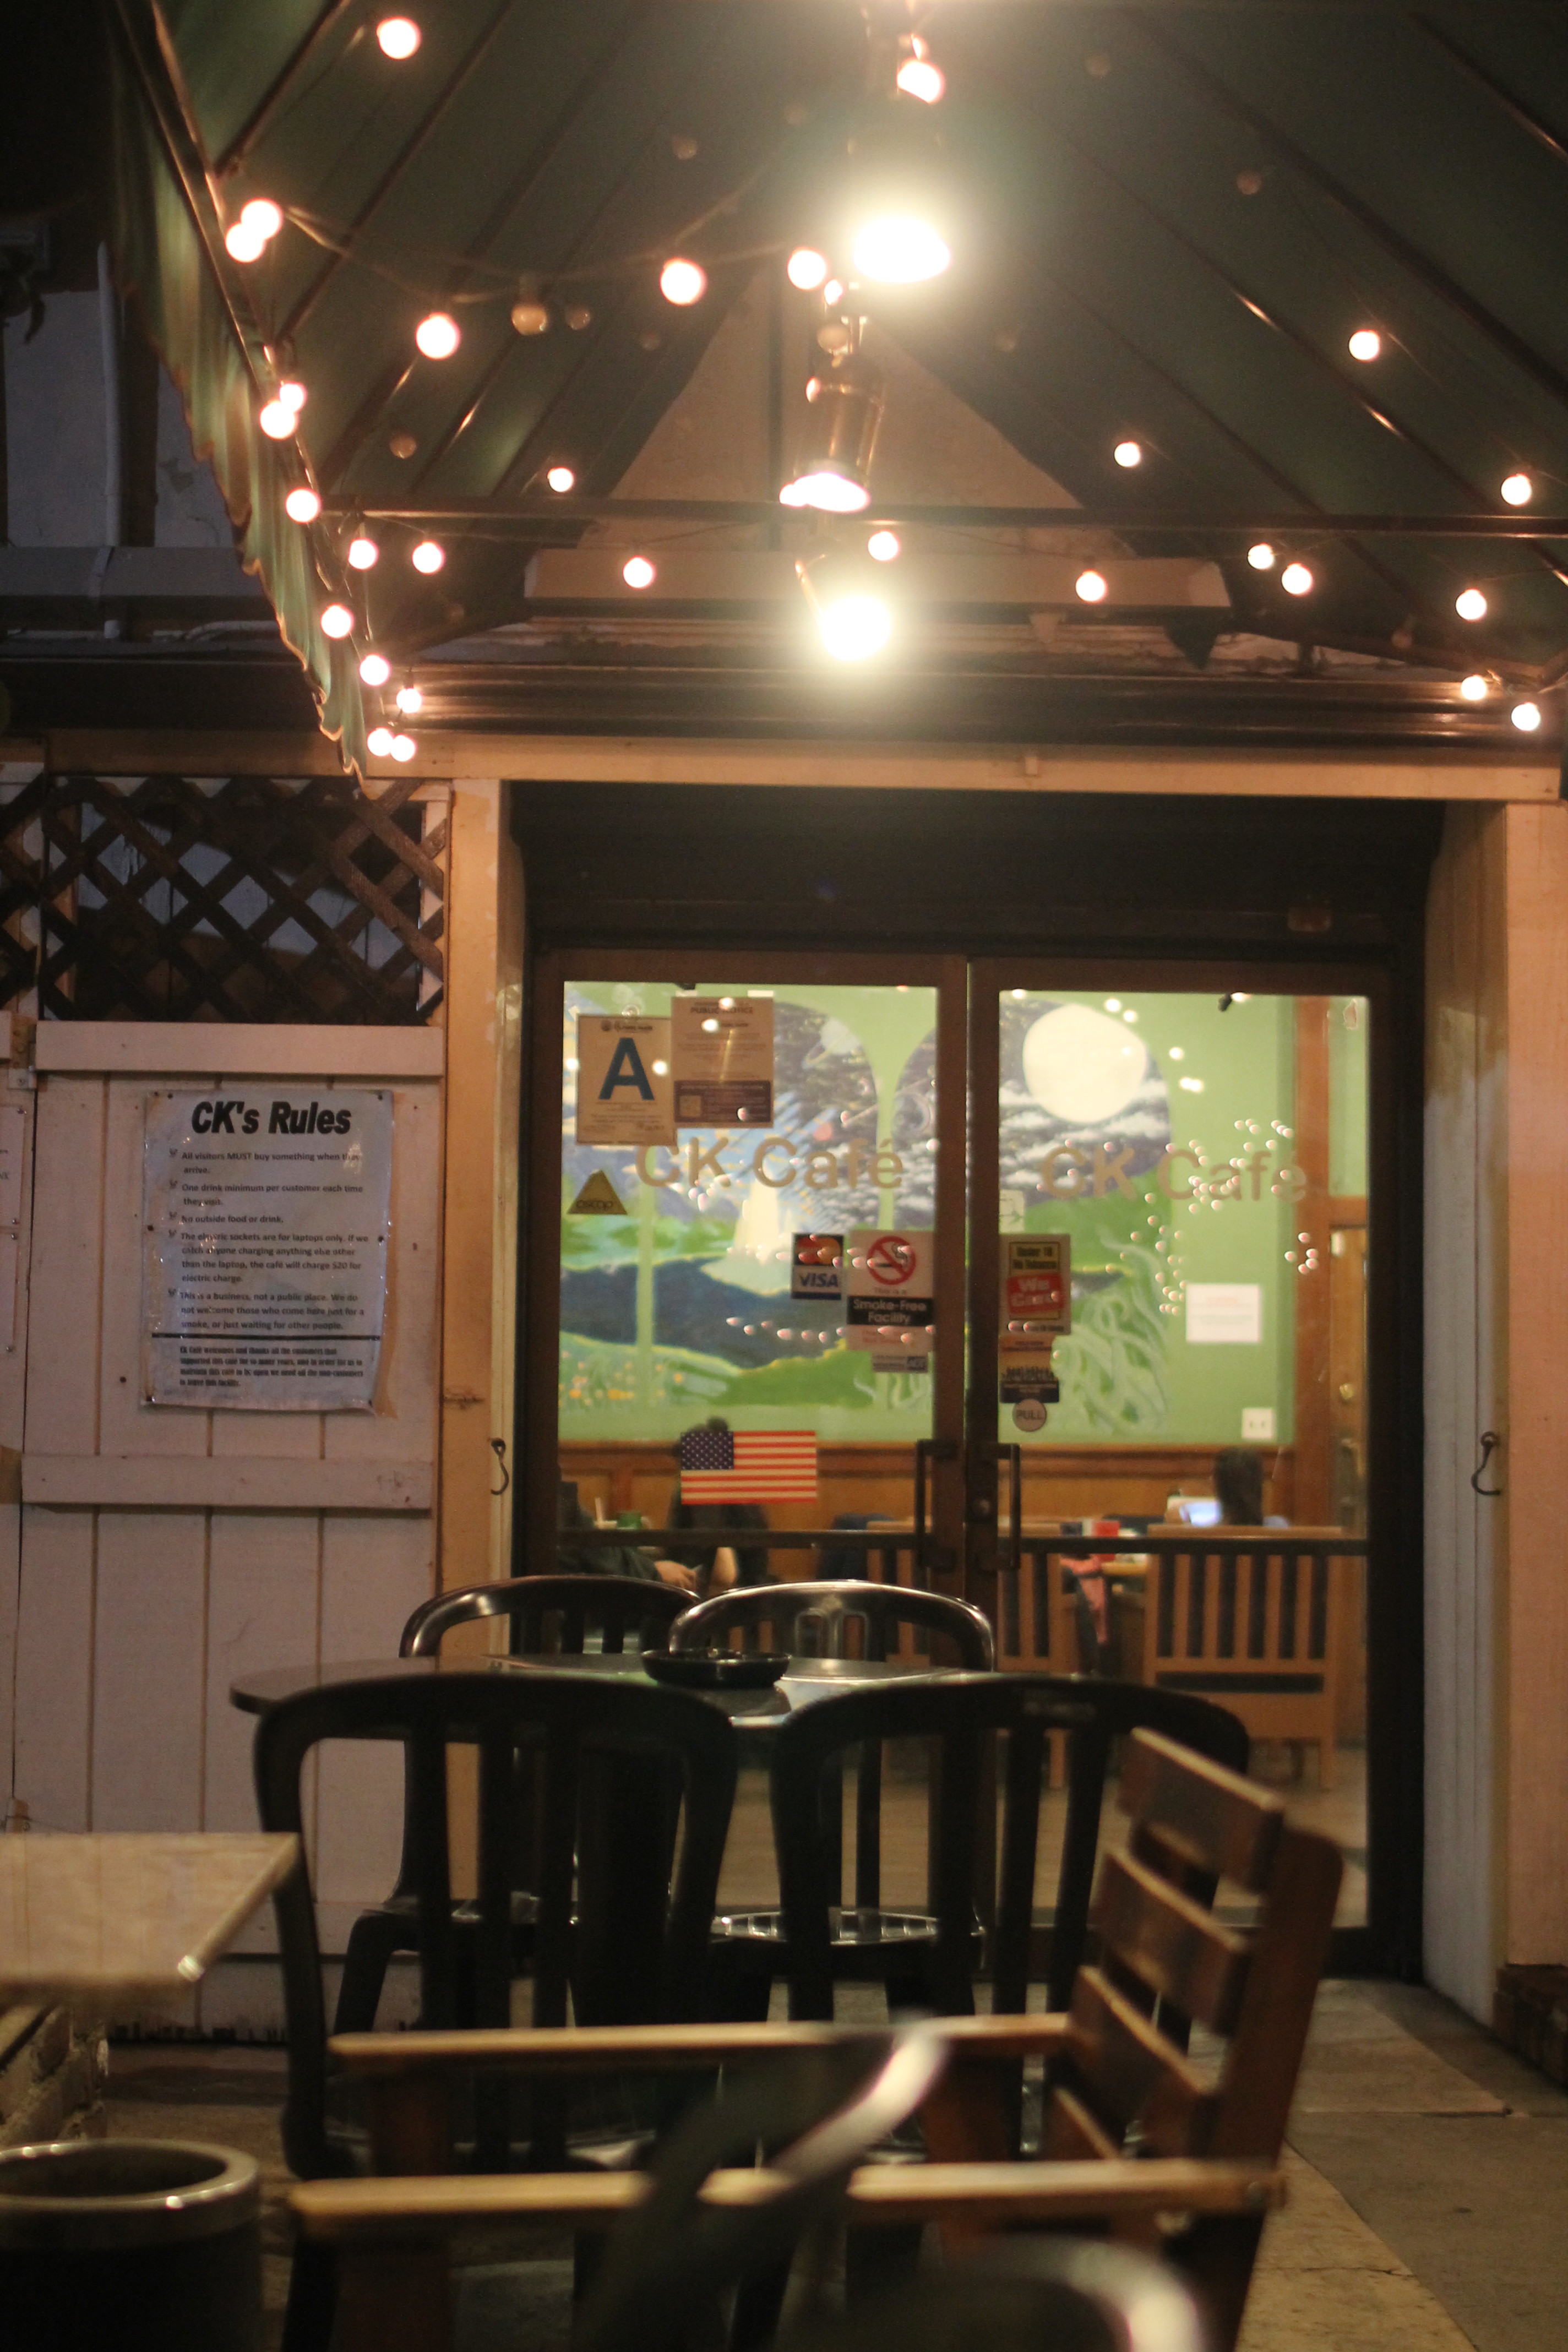 2. CK’s provides an outdoor patio area decorated with twinkly lights.